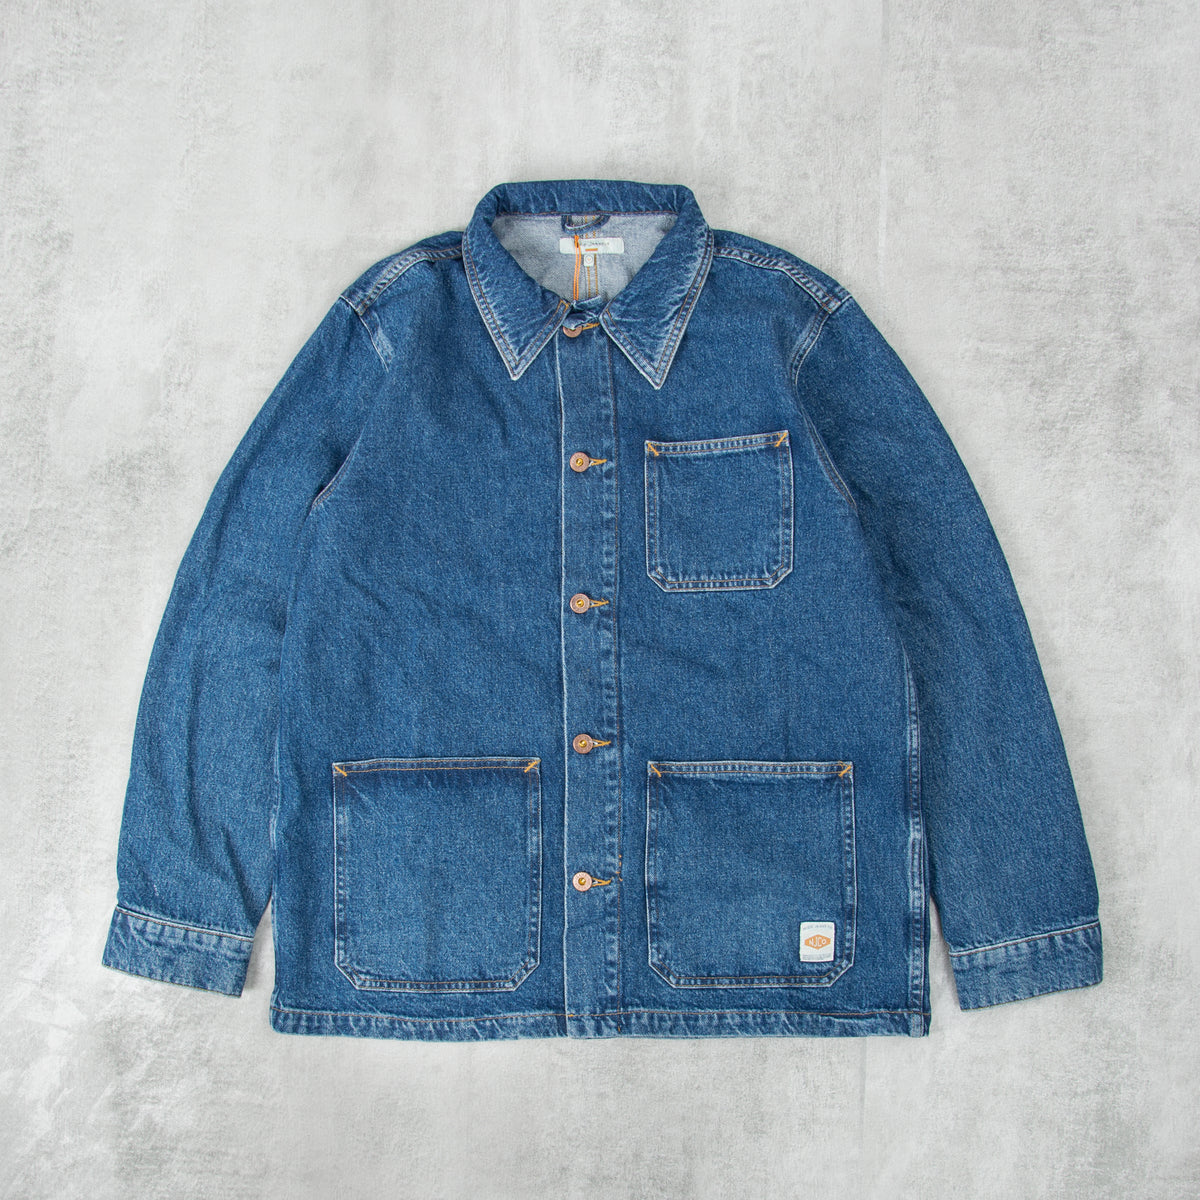 Nudie Barney Worker Jacket - 90s Blue online @Union Clothing | Union ...